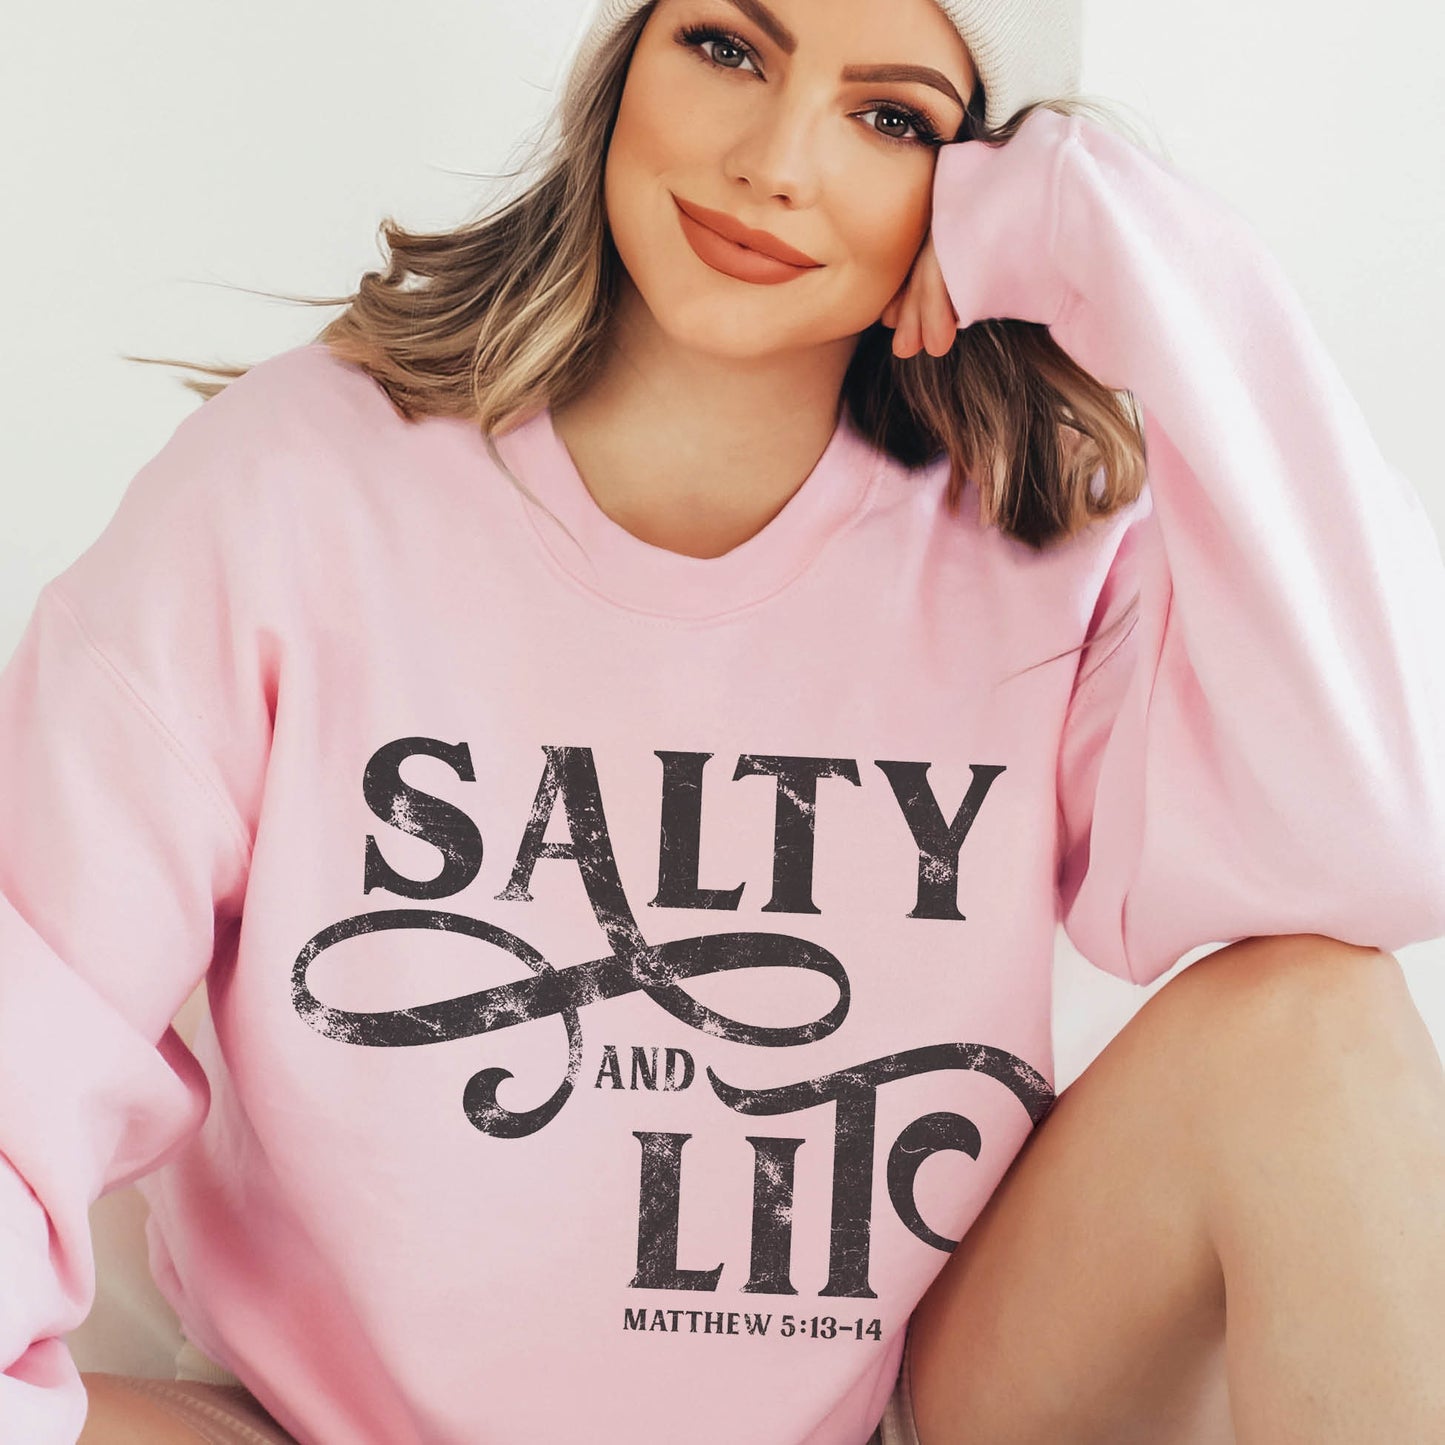 Trendy young woman wearing an oversized faith-based Salty And Lit Matthew 5:13-14 bible verse funny Christian aesthetic unisex crewneck sweatshirt with distressed swirl typography design printed in charcoal gray on cozy pink sweater for women